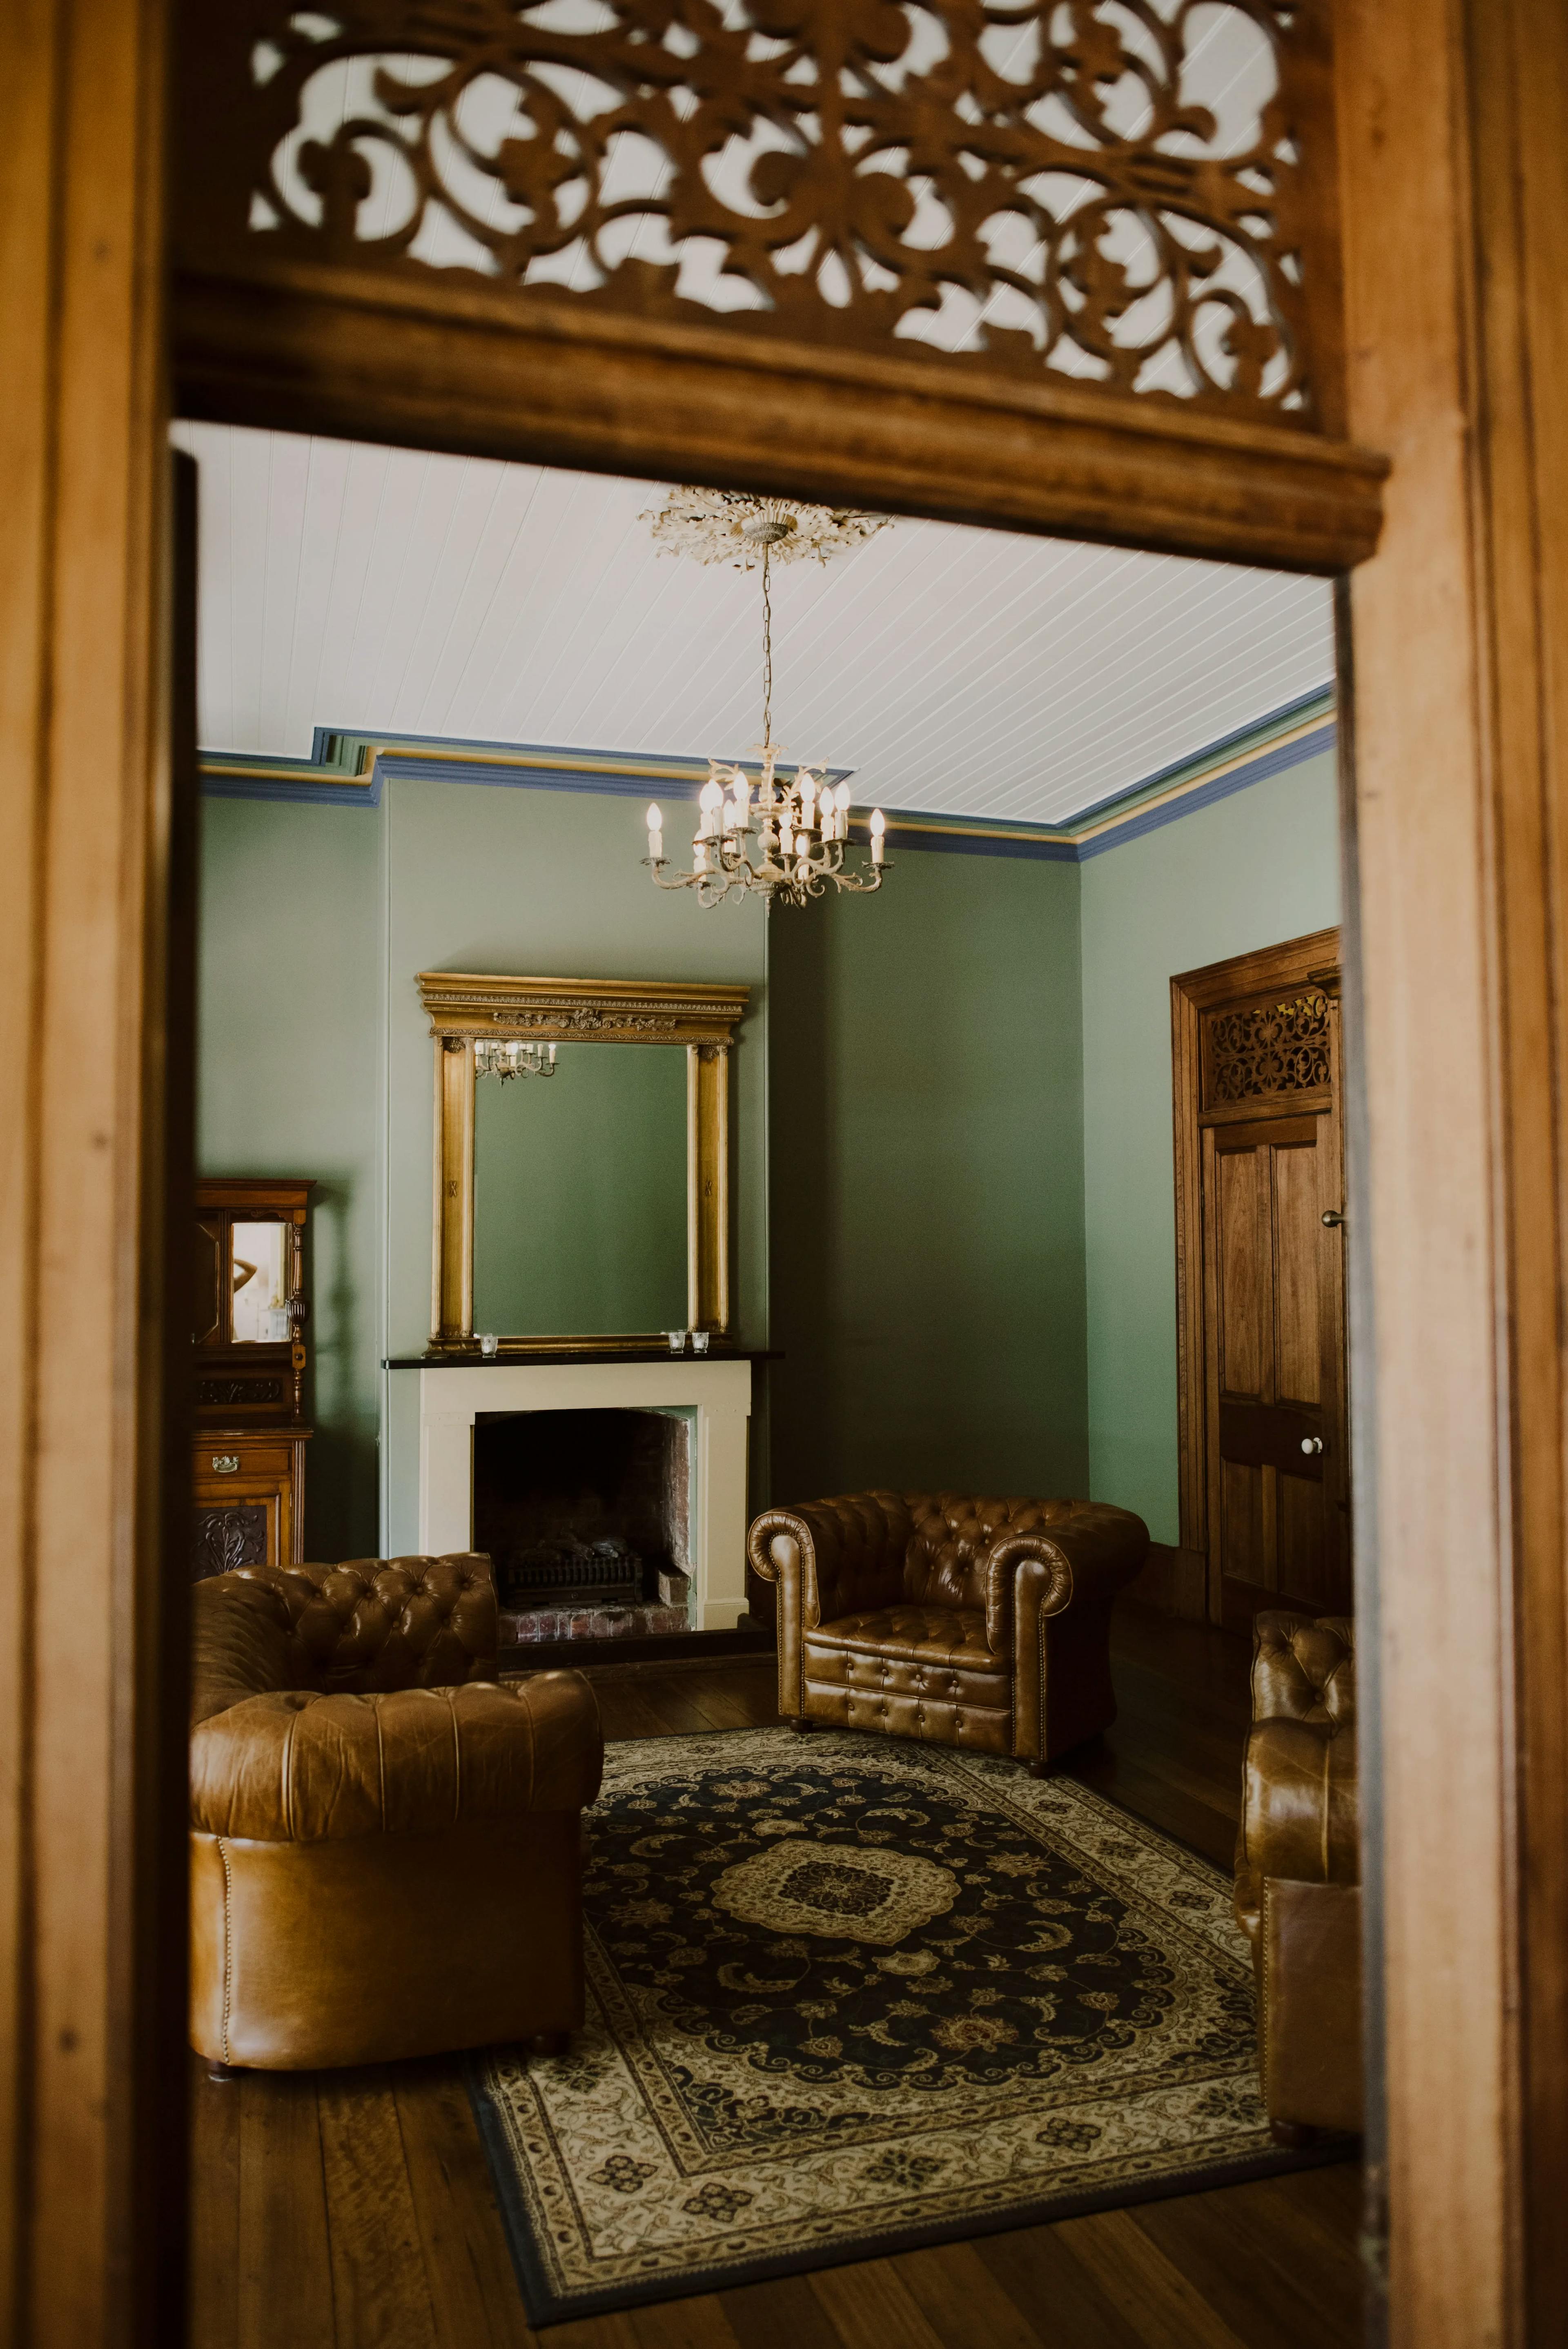 Cozy room with green walls viewed through a carved wooden frame. It features a chandelier, ornate fireplace with a large mirror above it, and three brown leather chairs around a patterned rug on a wooden floor.